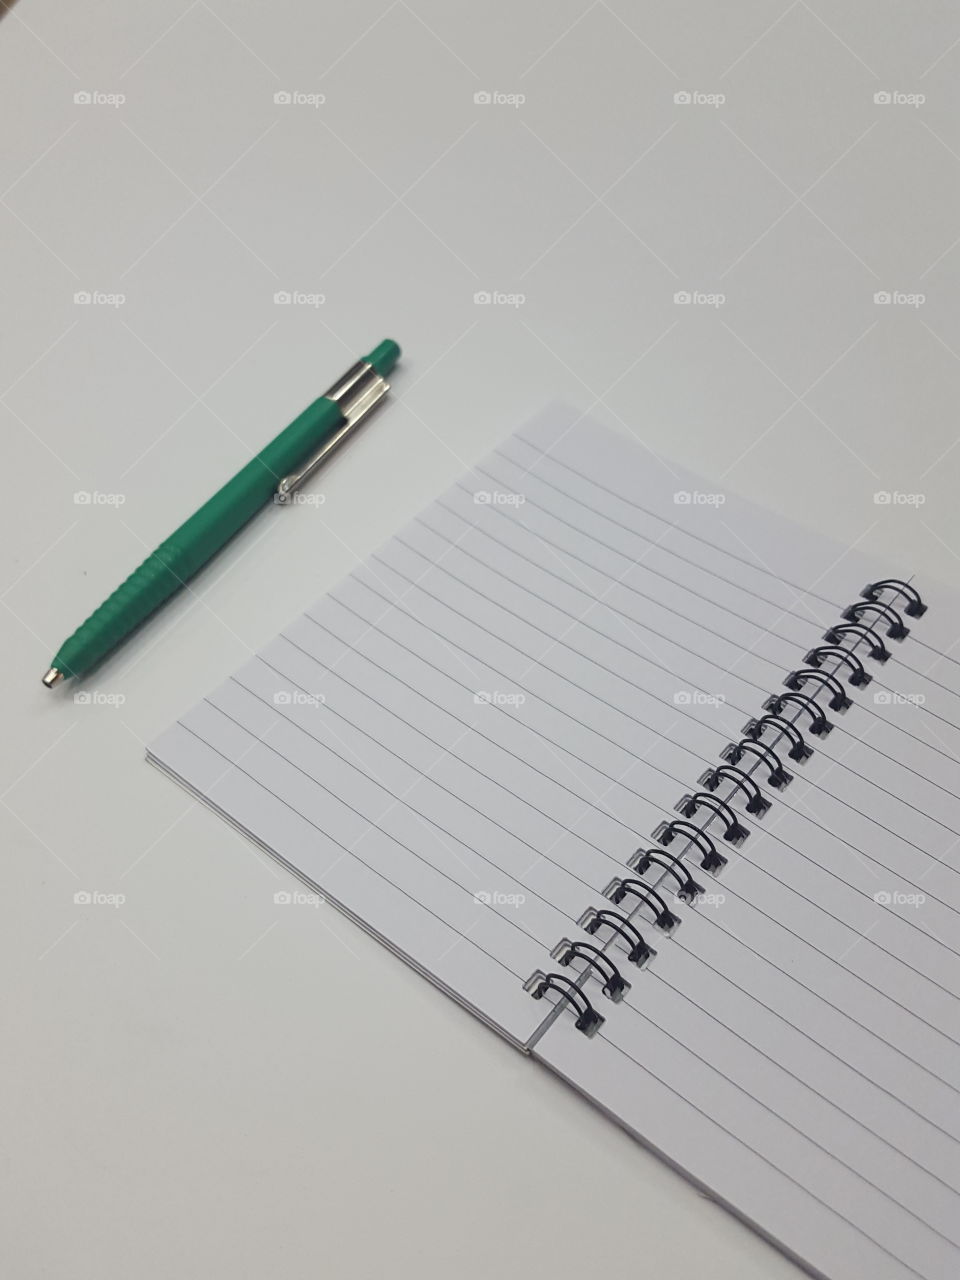 Green plastic ball pen and open ruled spiral notebook